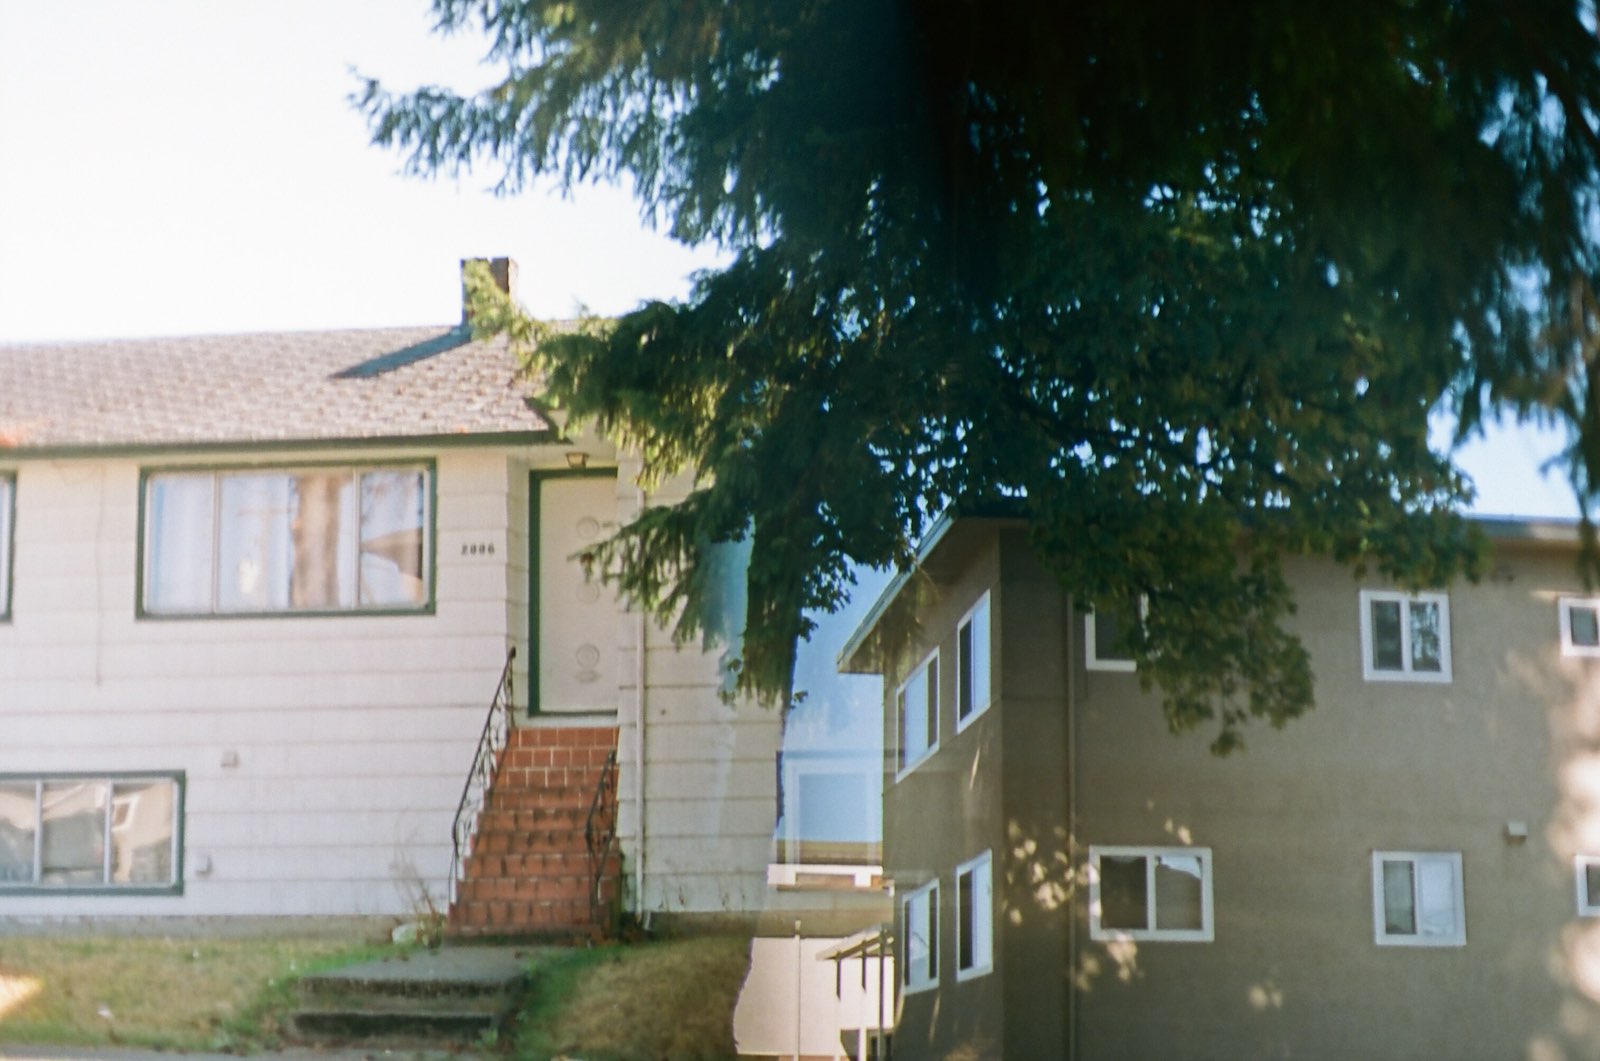 A double-exposure photograph depicts, on the left, a small white house, and, on the right, a grey three-storey walk-up apartment building, both on sunny days.